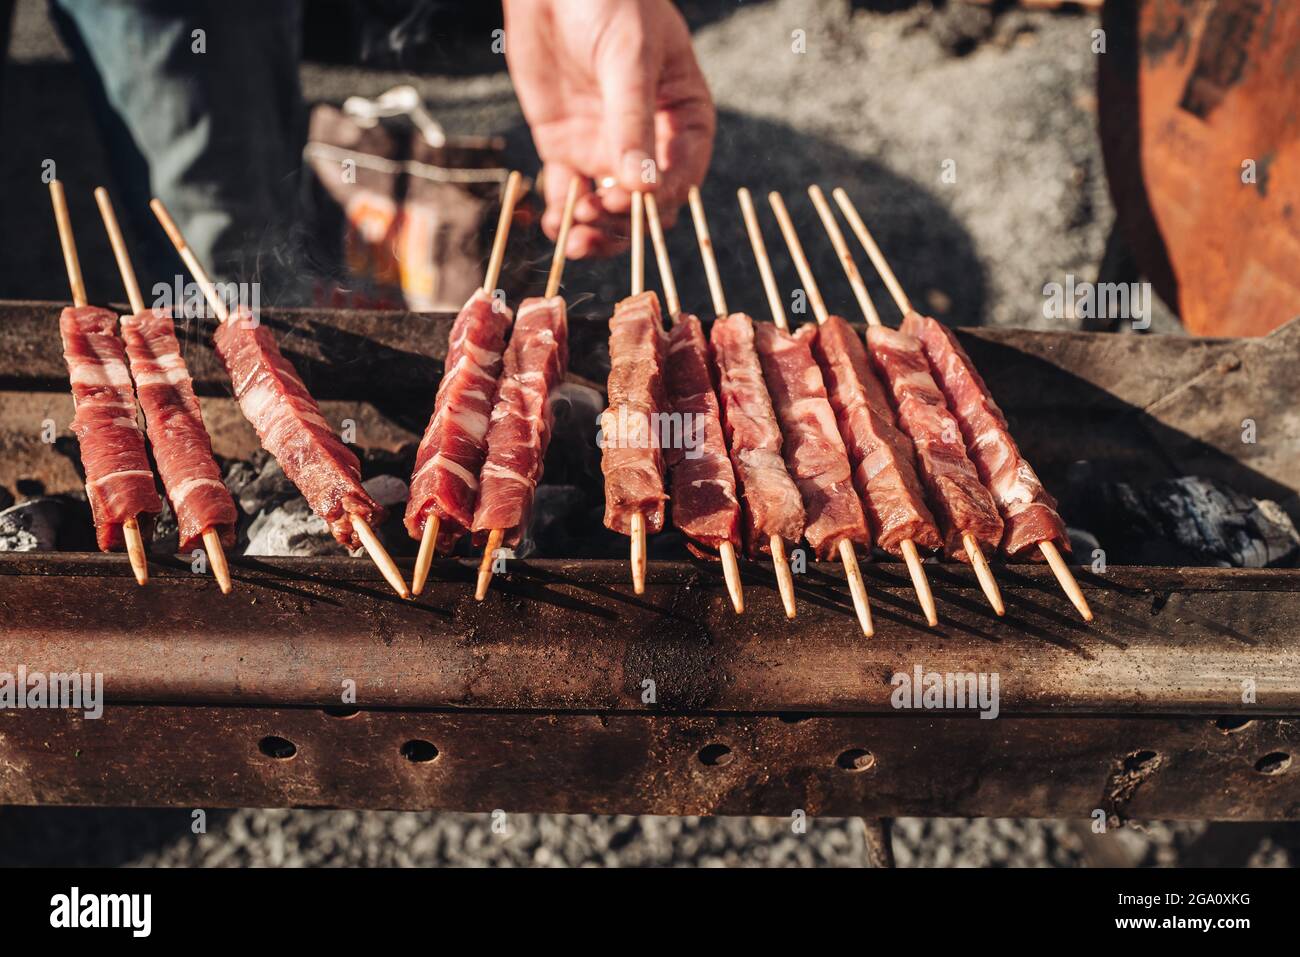 Arrosticini, a traditional sheep meat skewer from Abruzzo region, italy  Stock Photo - Alamy